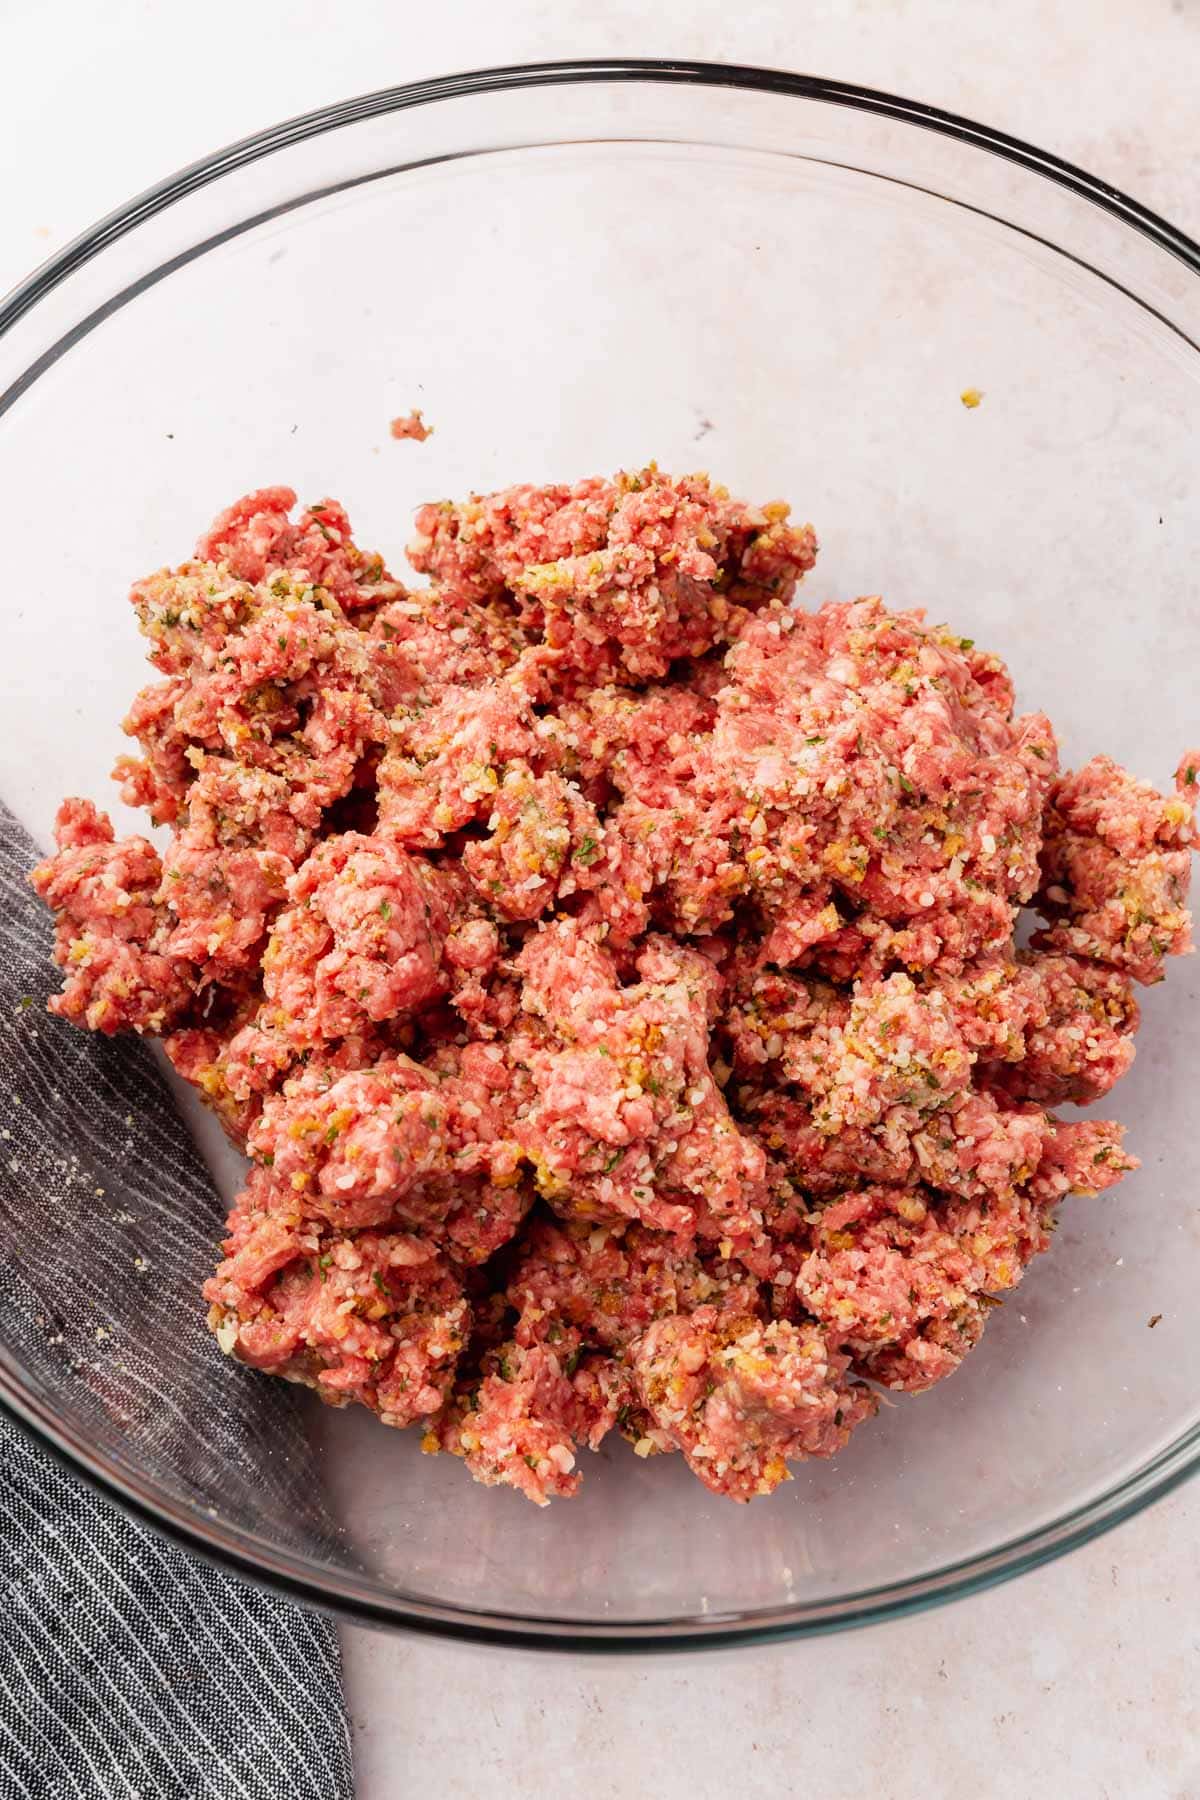 A bowl of ground beef mixed with spices, parmesan and gluten-free breadcrumbs to make meatballs.